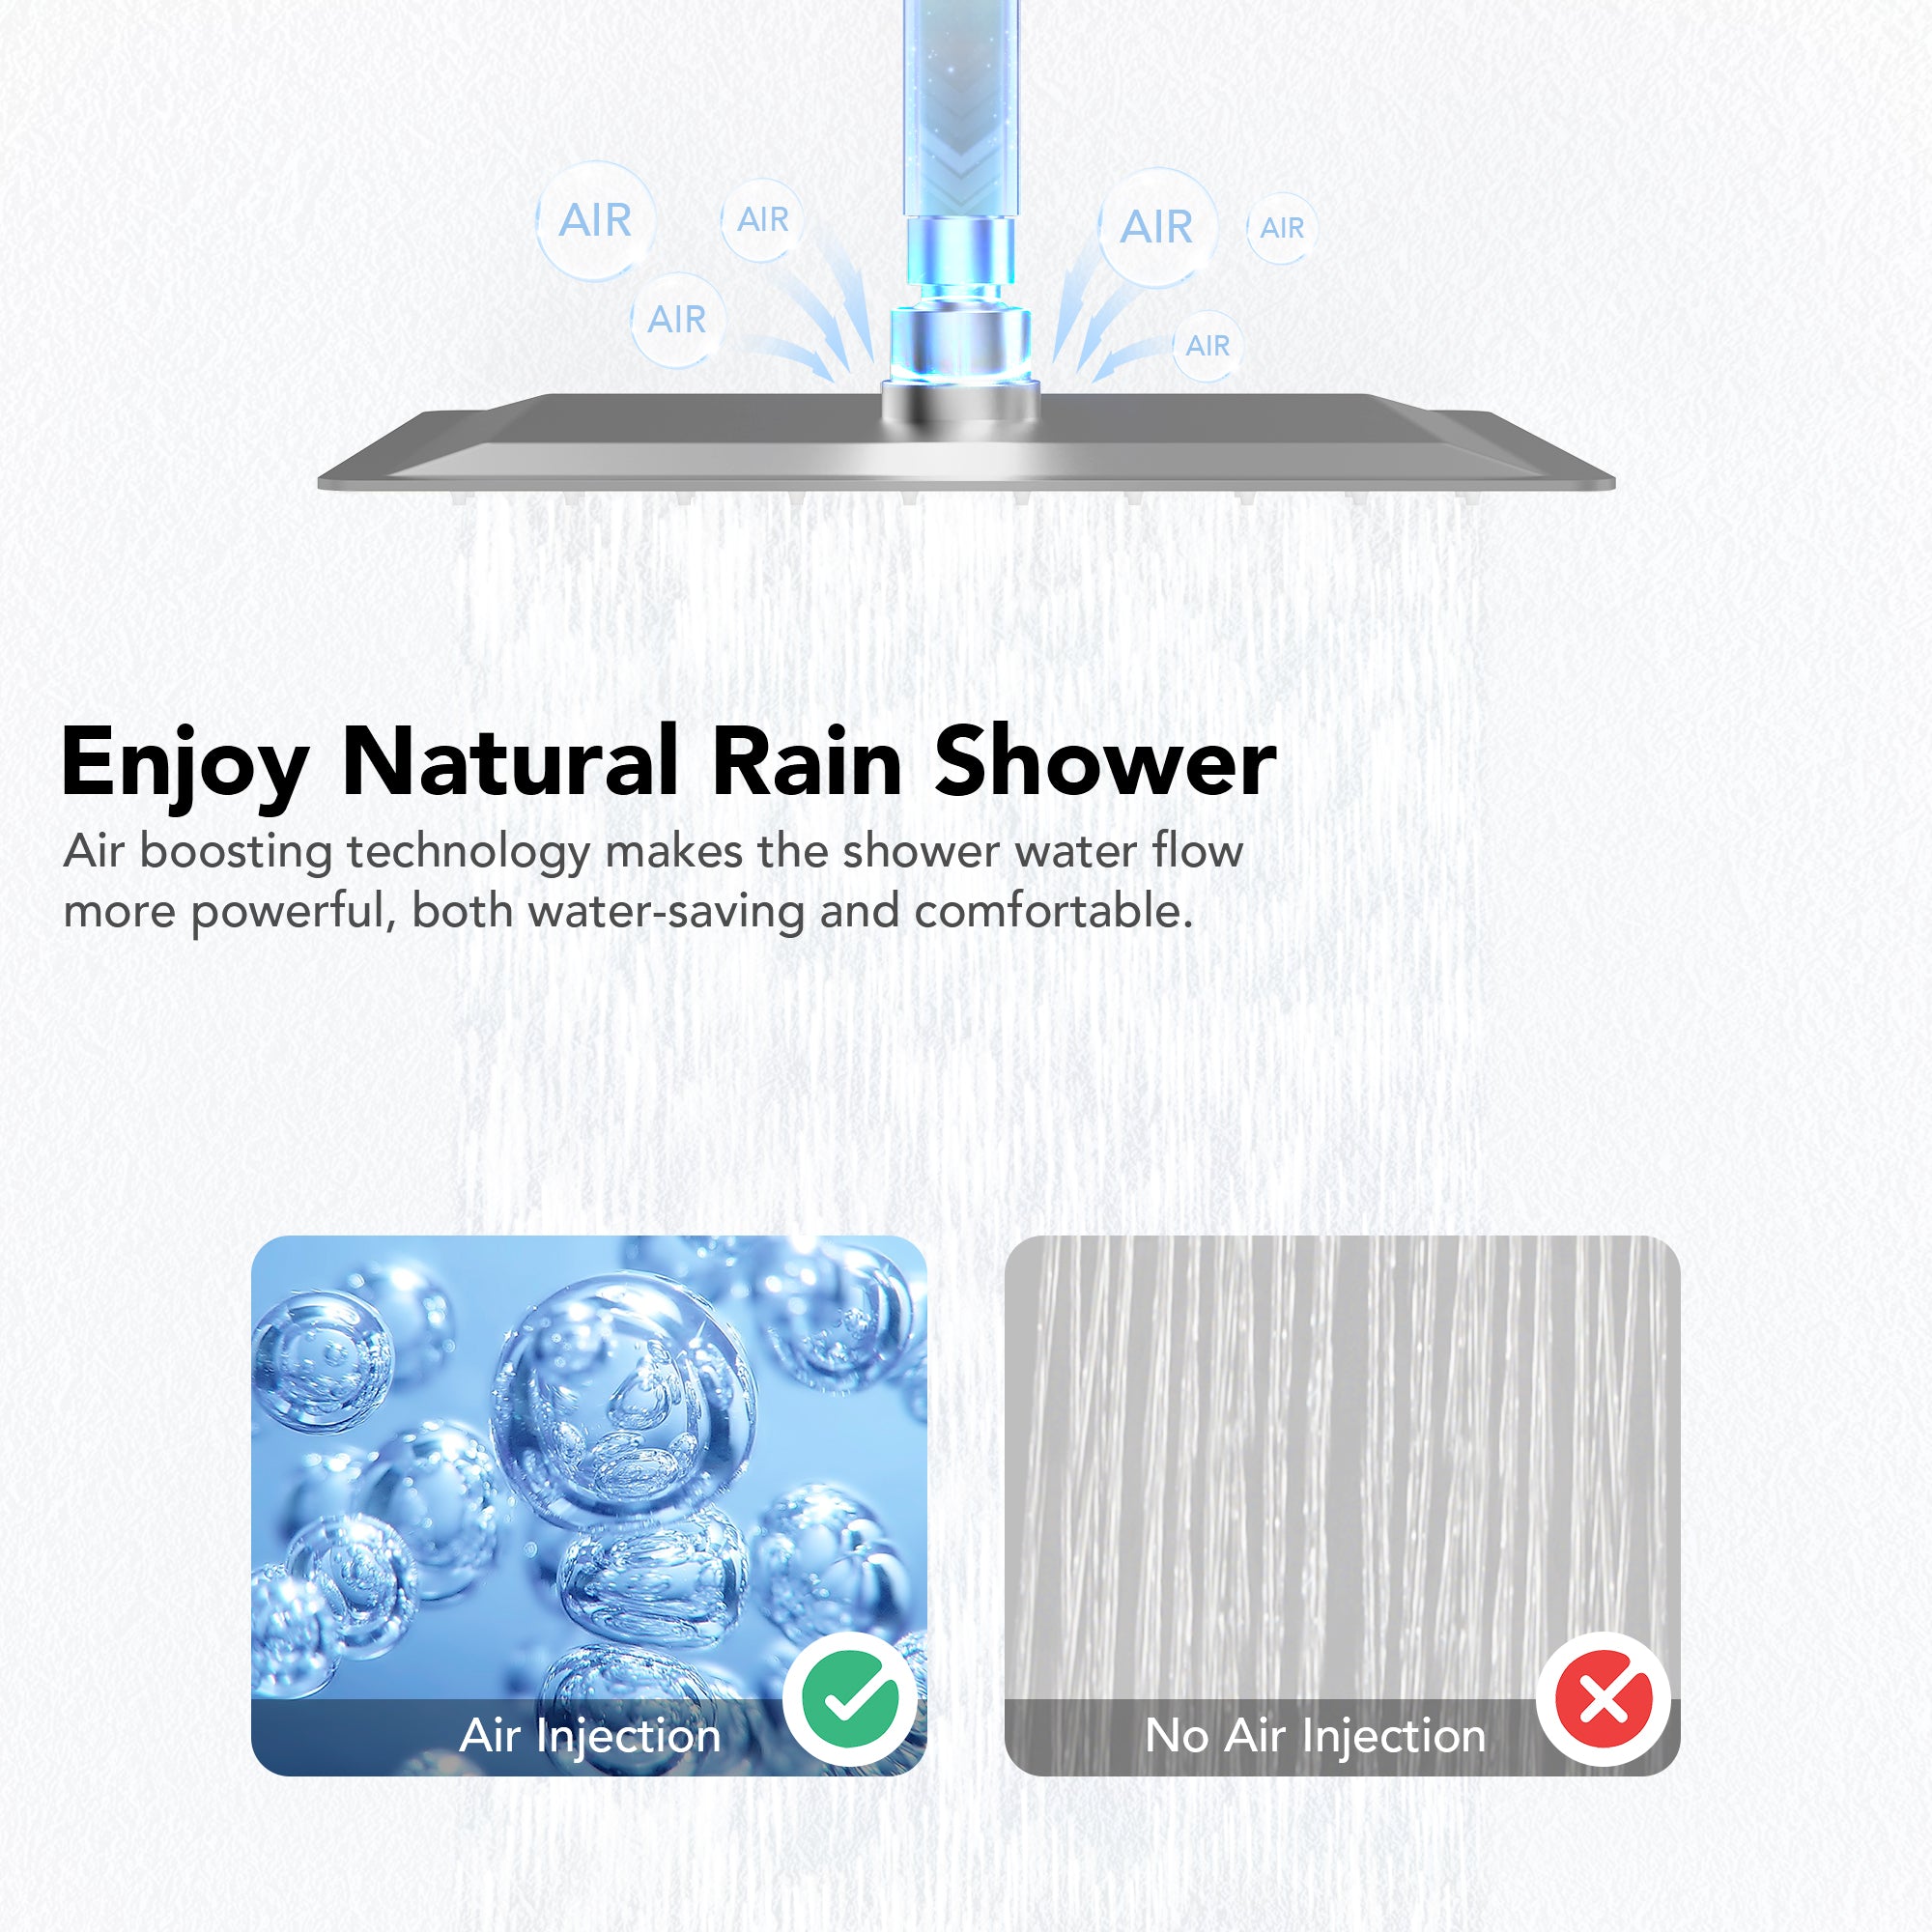 EVERSTEIN SFS-1061-NK16 16" High-Pressure Rainfall Complete Shower System with Rough-in Valve